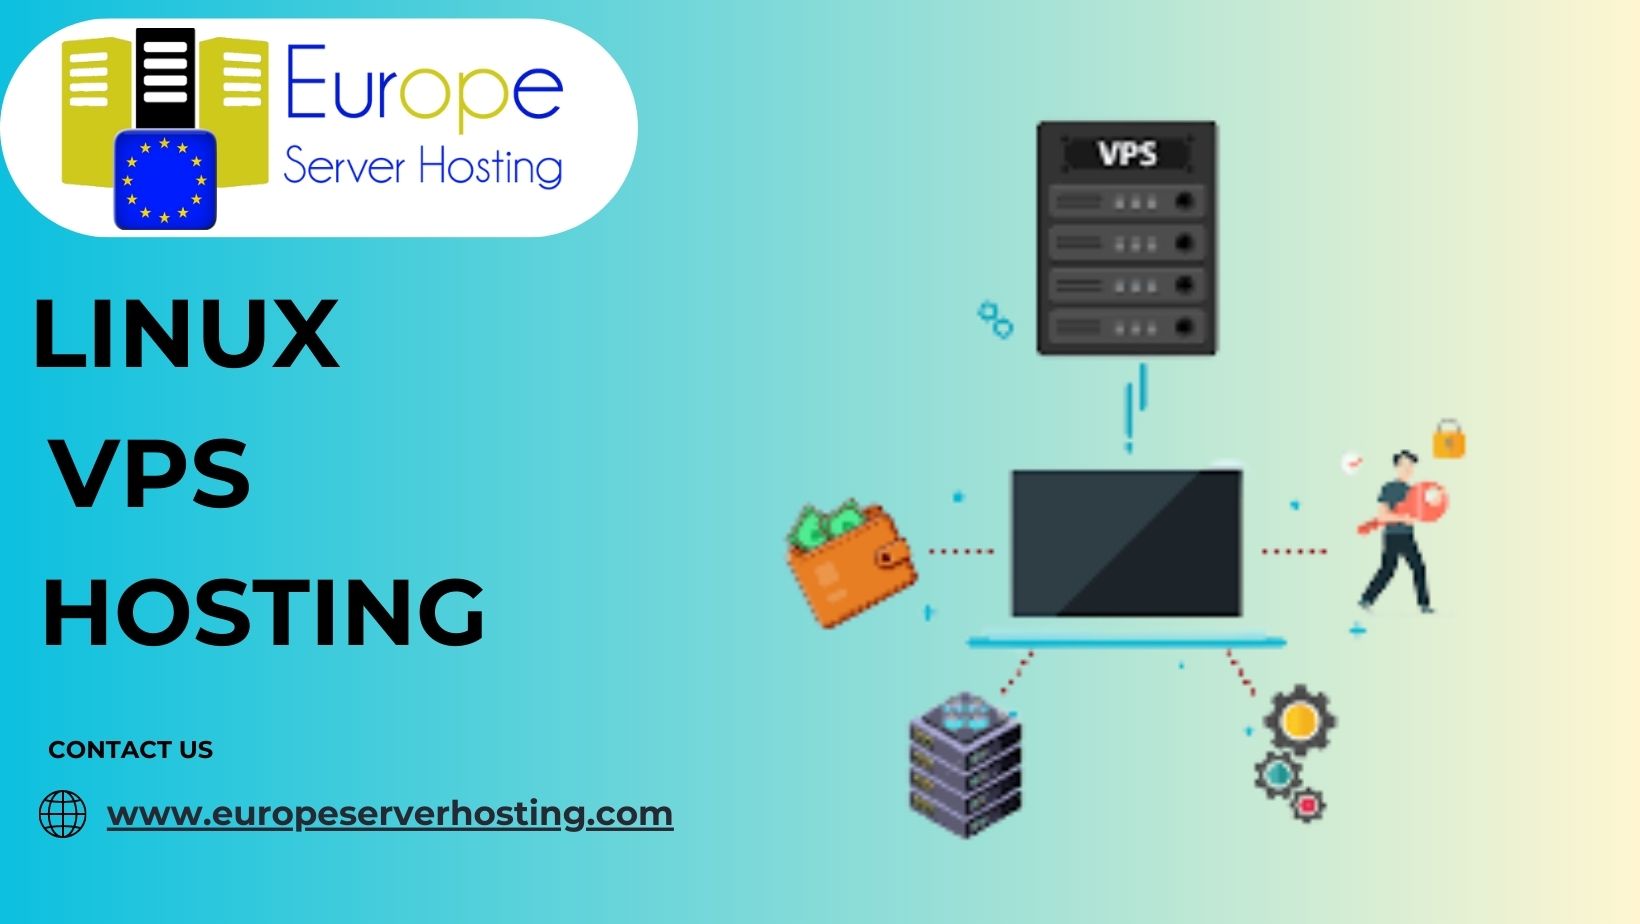 Linux VPS Hosting grants you unparalleled control over your server environment. From choosing the operating system to configuring software and applications, you have the freedom to tailor the server setup to match your exact specifications